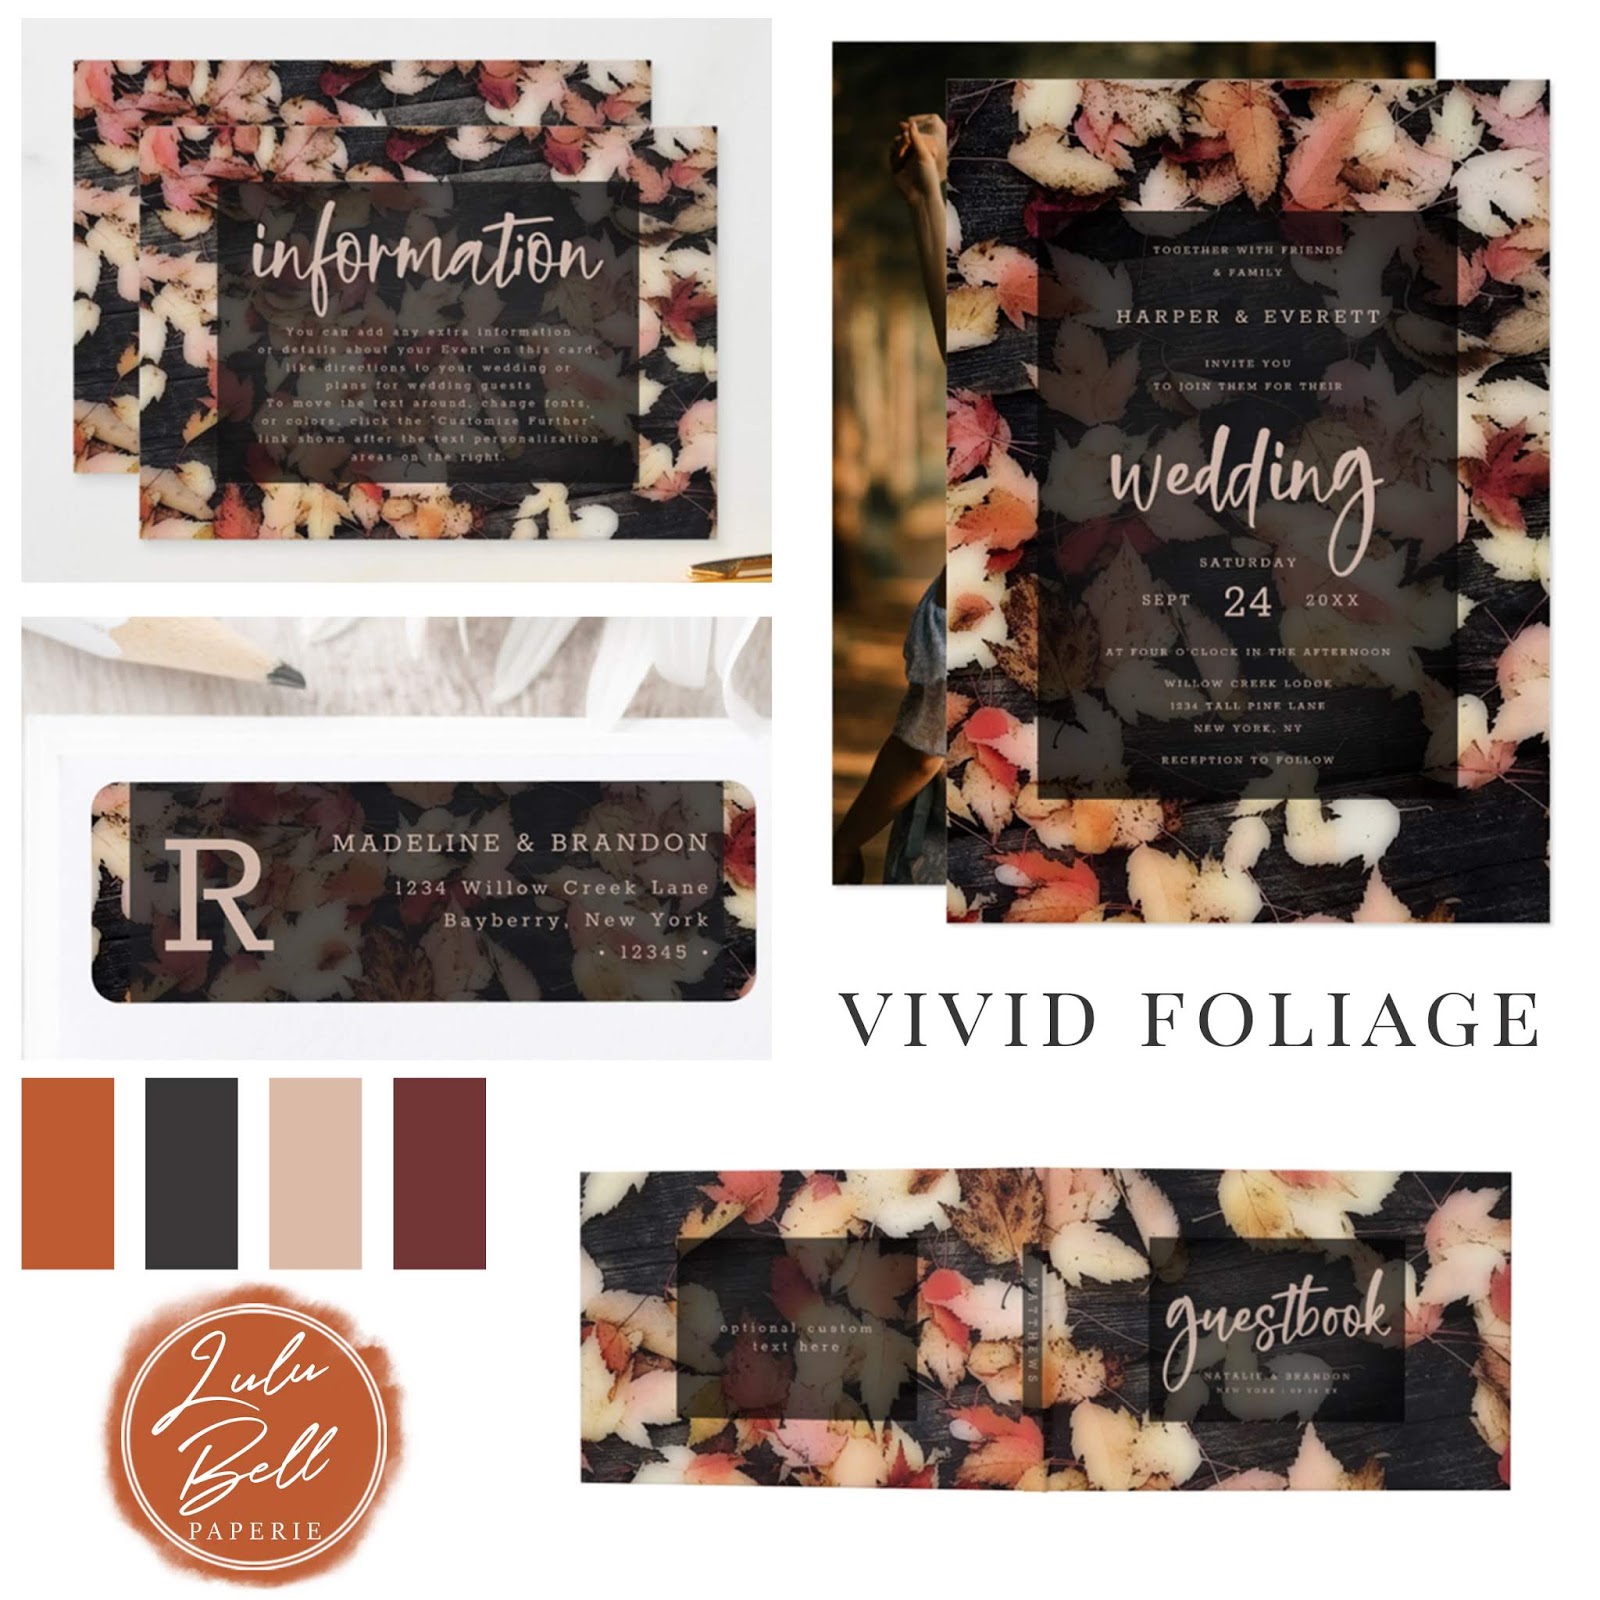 Vivid Foliage Wedding Invitation Suite - Information Enclosure Cards, Envelope Liners, Custom Photo Invitations, and Guestbook